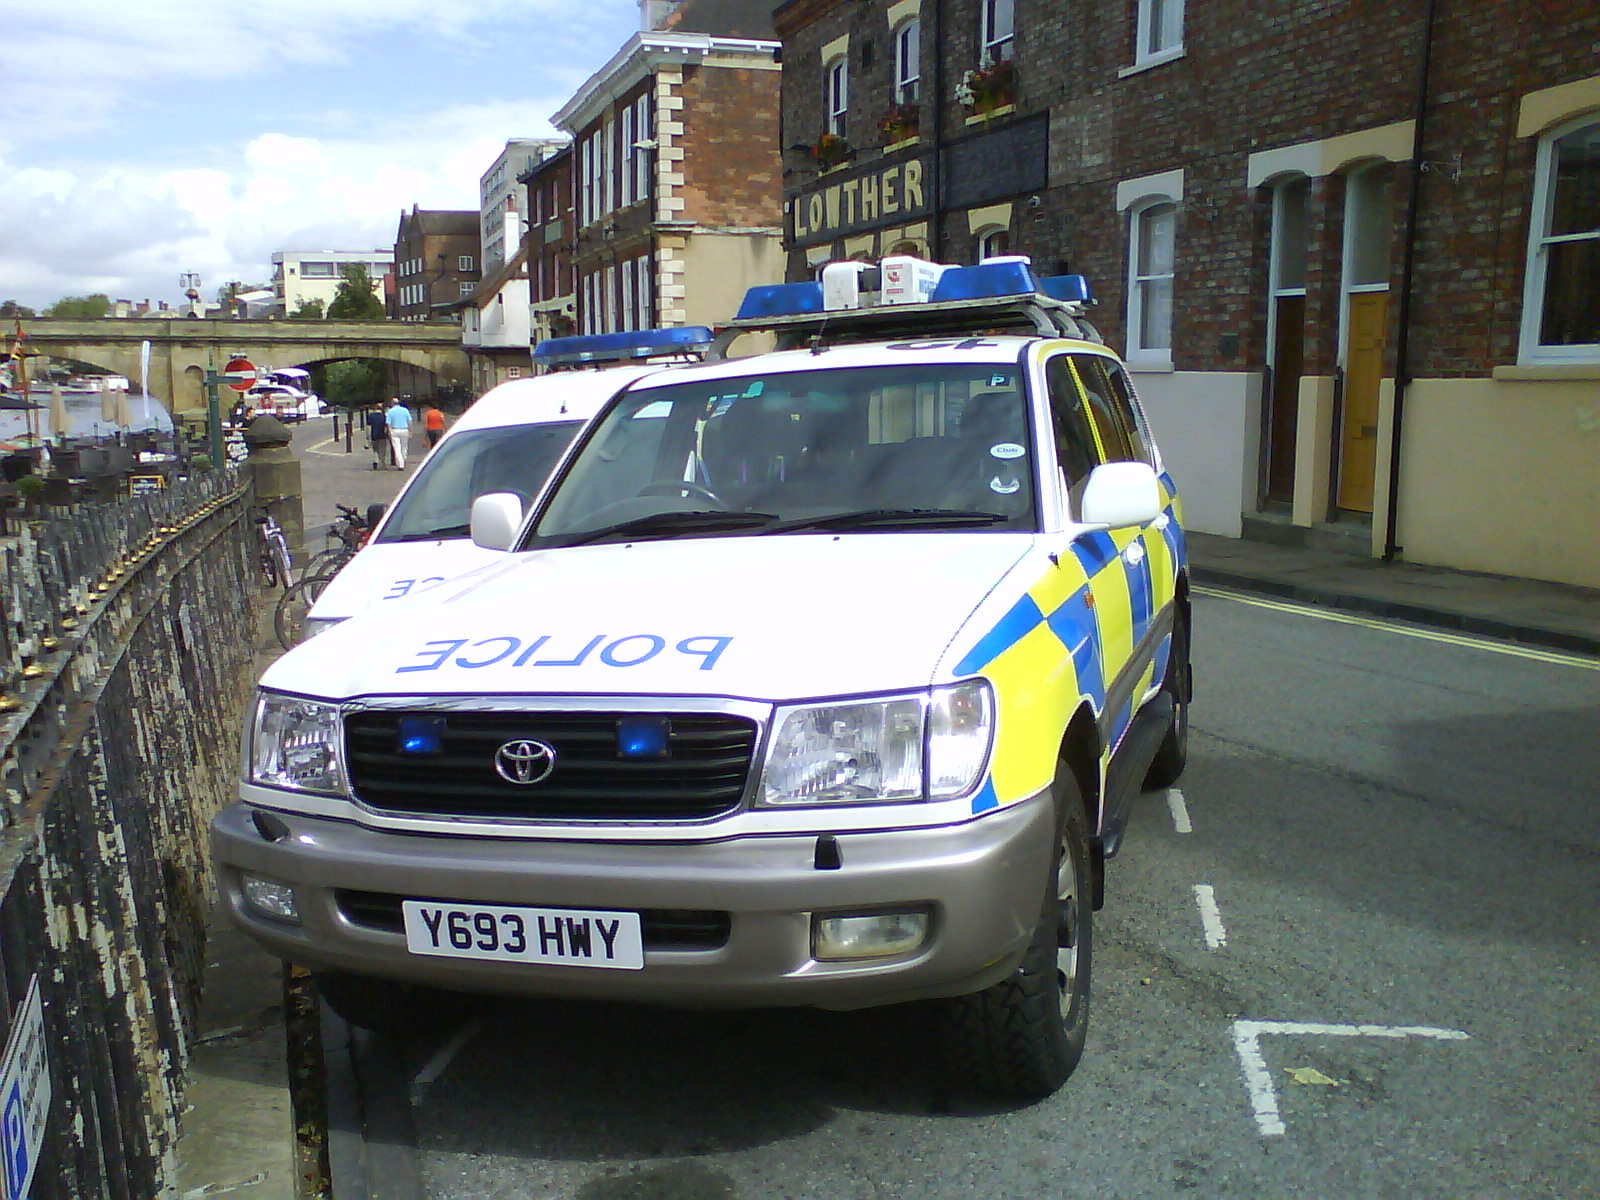 a police car parked in the street with other cars and buildings